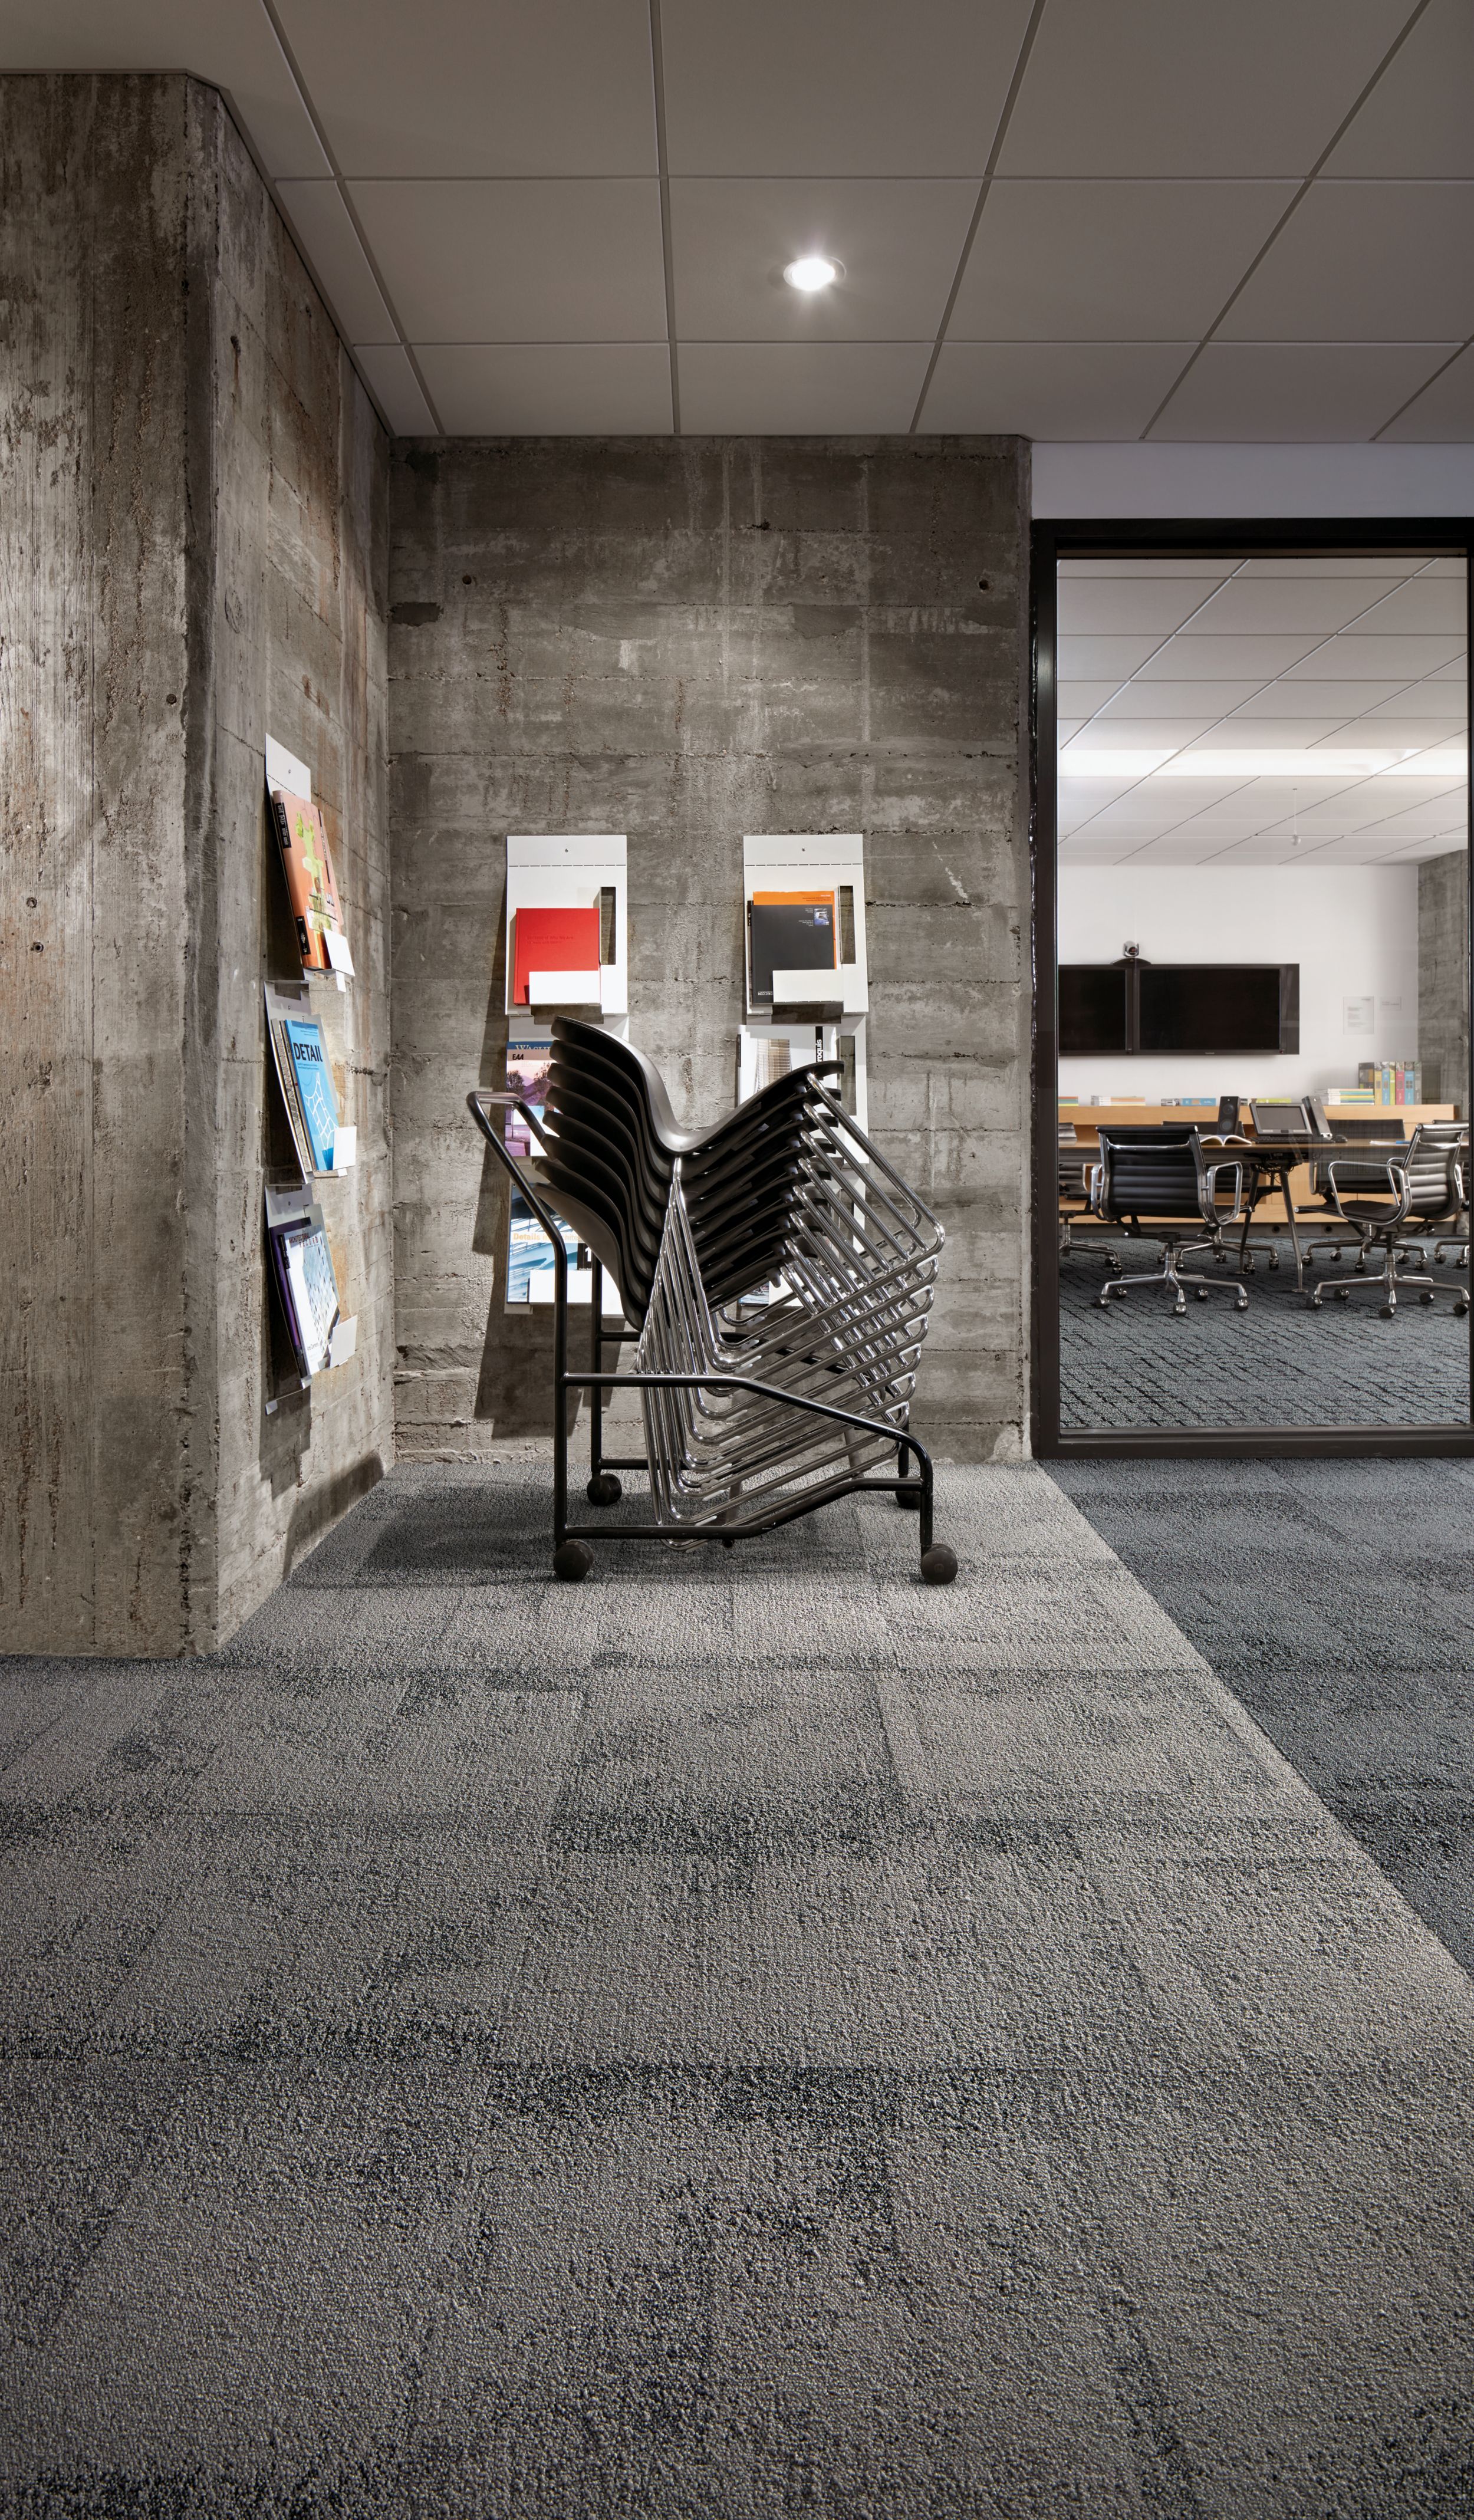 image Interface Flagstone carpet tile with stack of chairs numéro 1